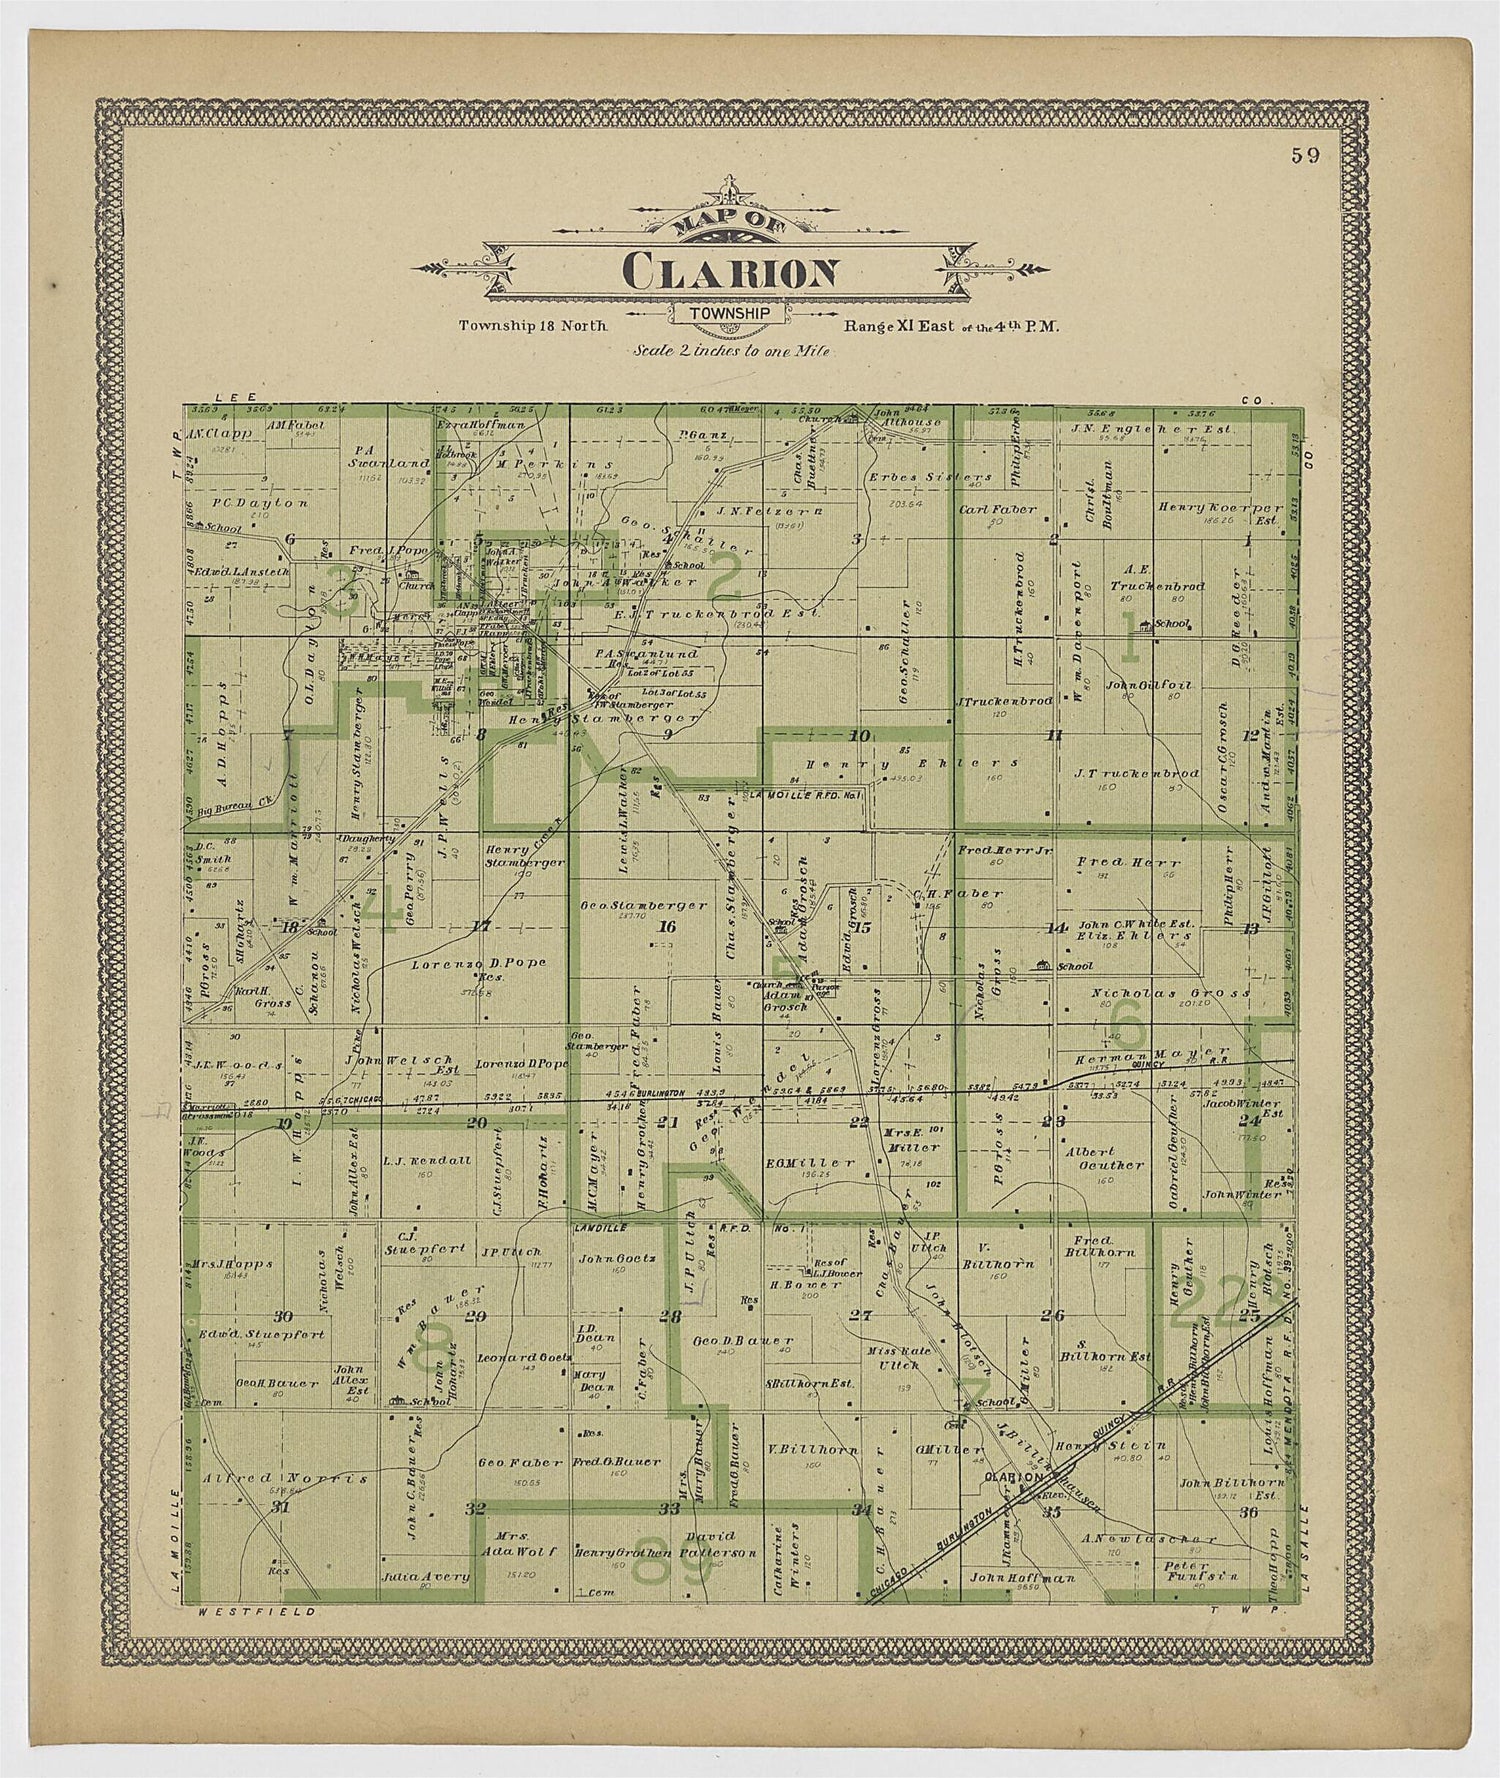 This old map of Image 33 of 20th Century Atlas of Bureau County, Illinois from Atlas of Bureau County, Illinois from 1905 was created by  Middle-West Publishing Co in 1905